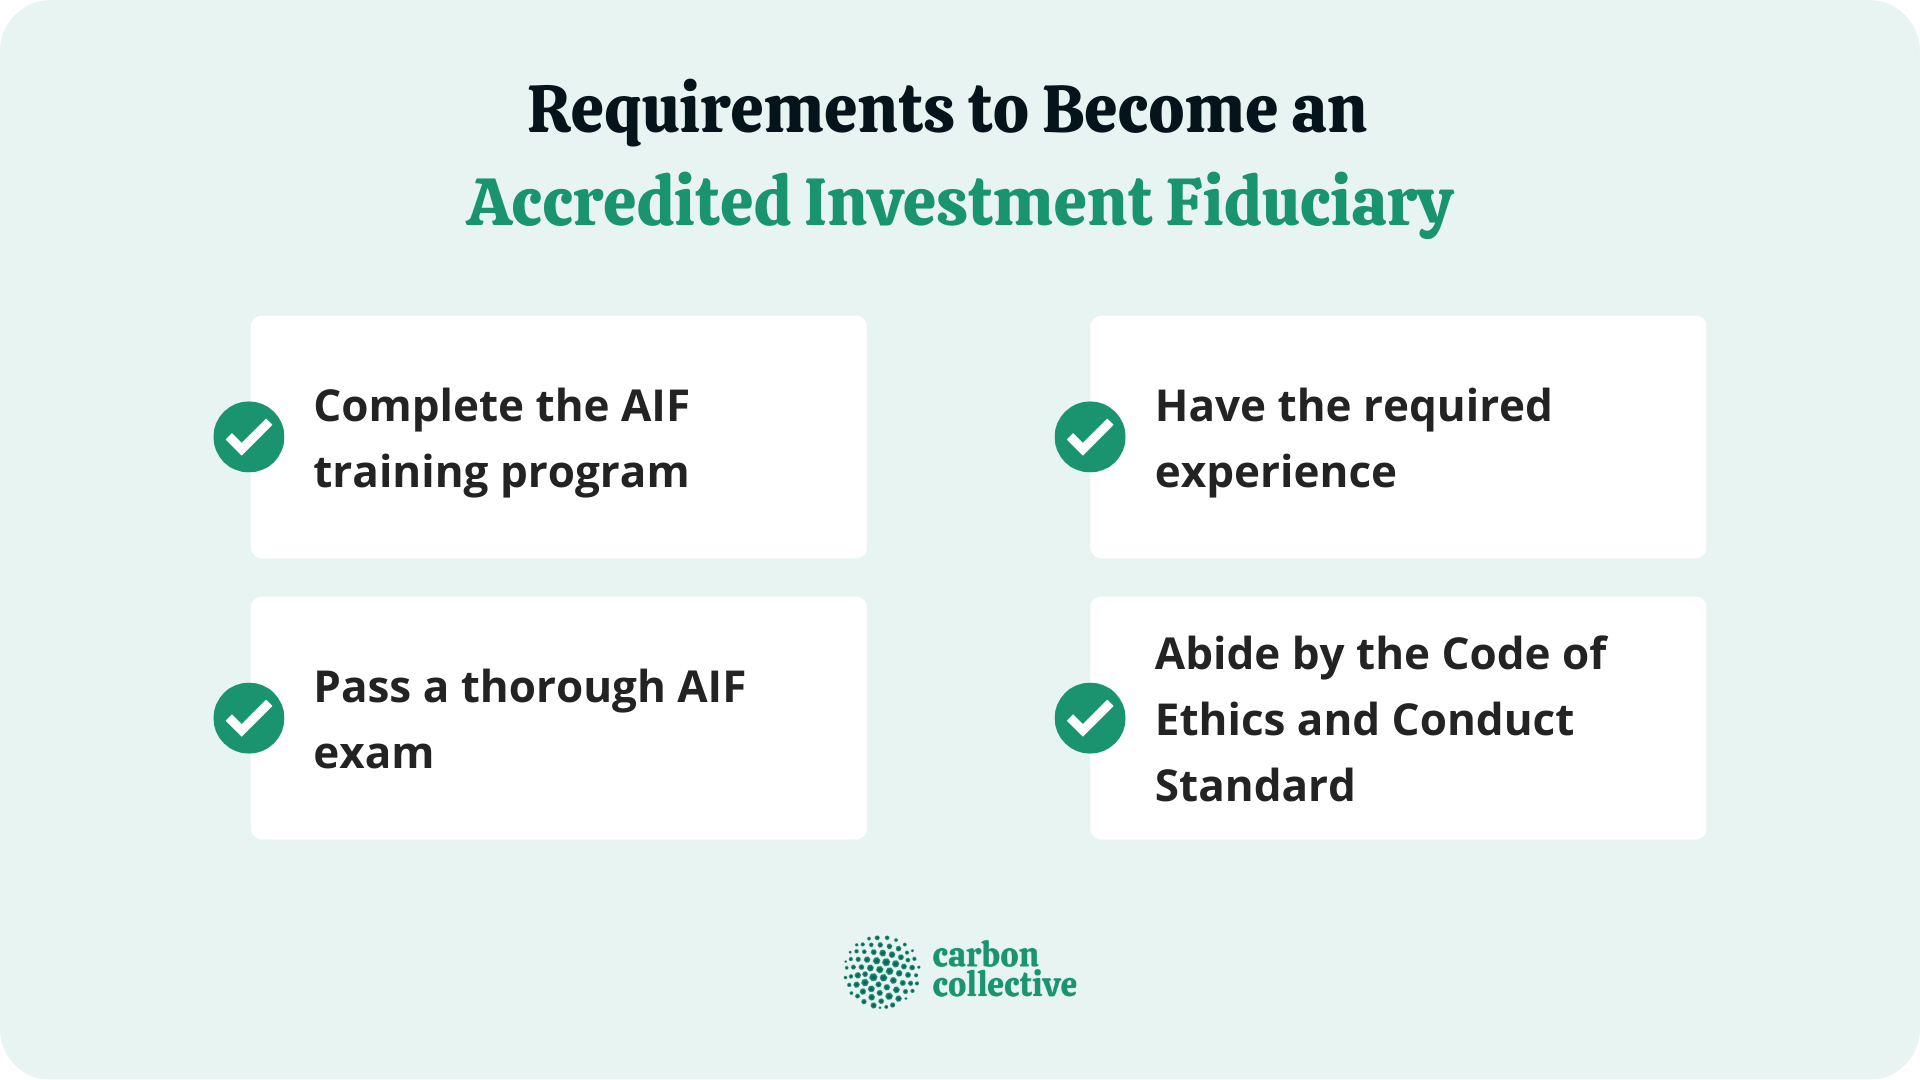 Requirements_to_Become_an_Accredited_Investment_Fiduciary